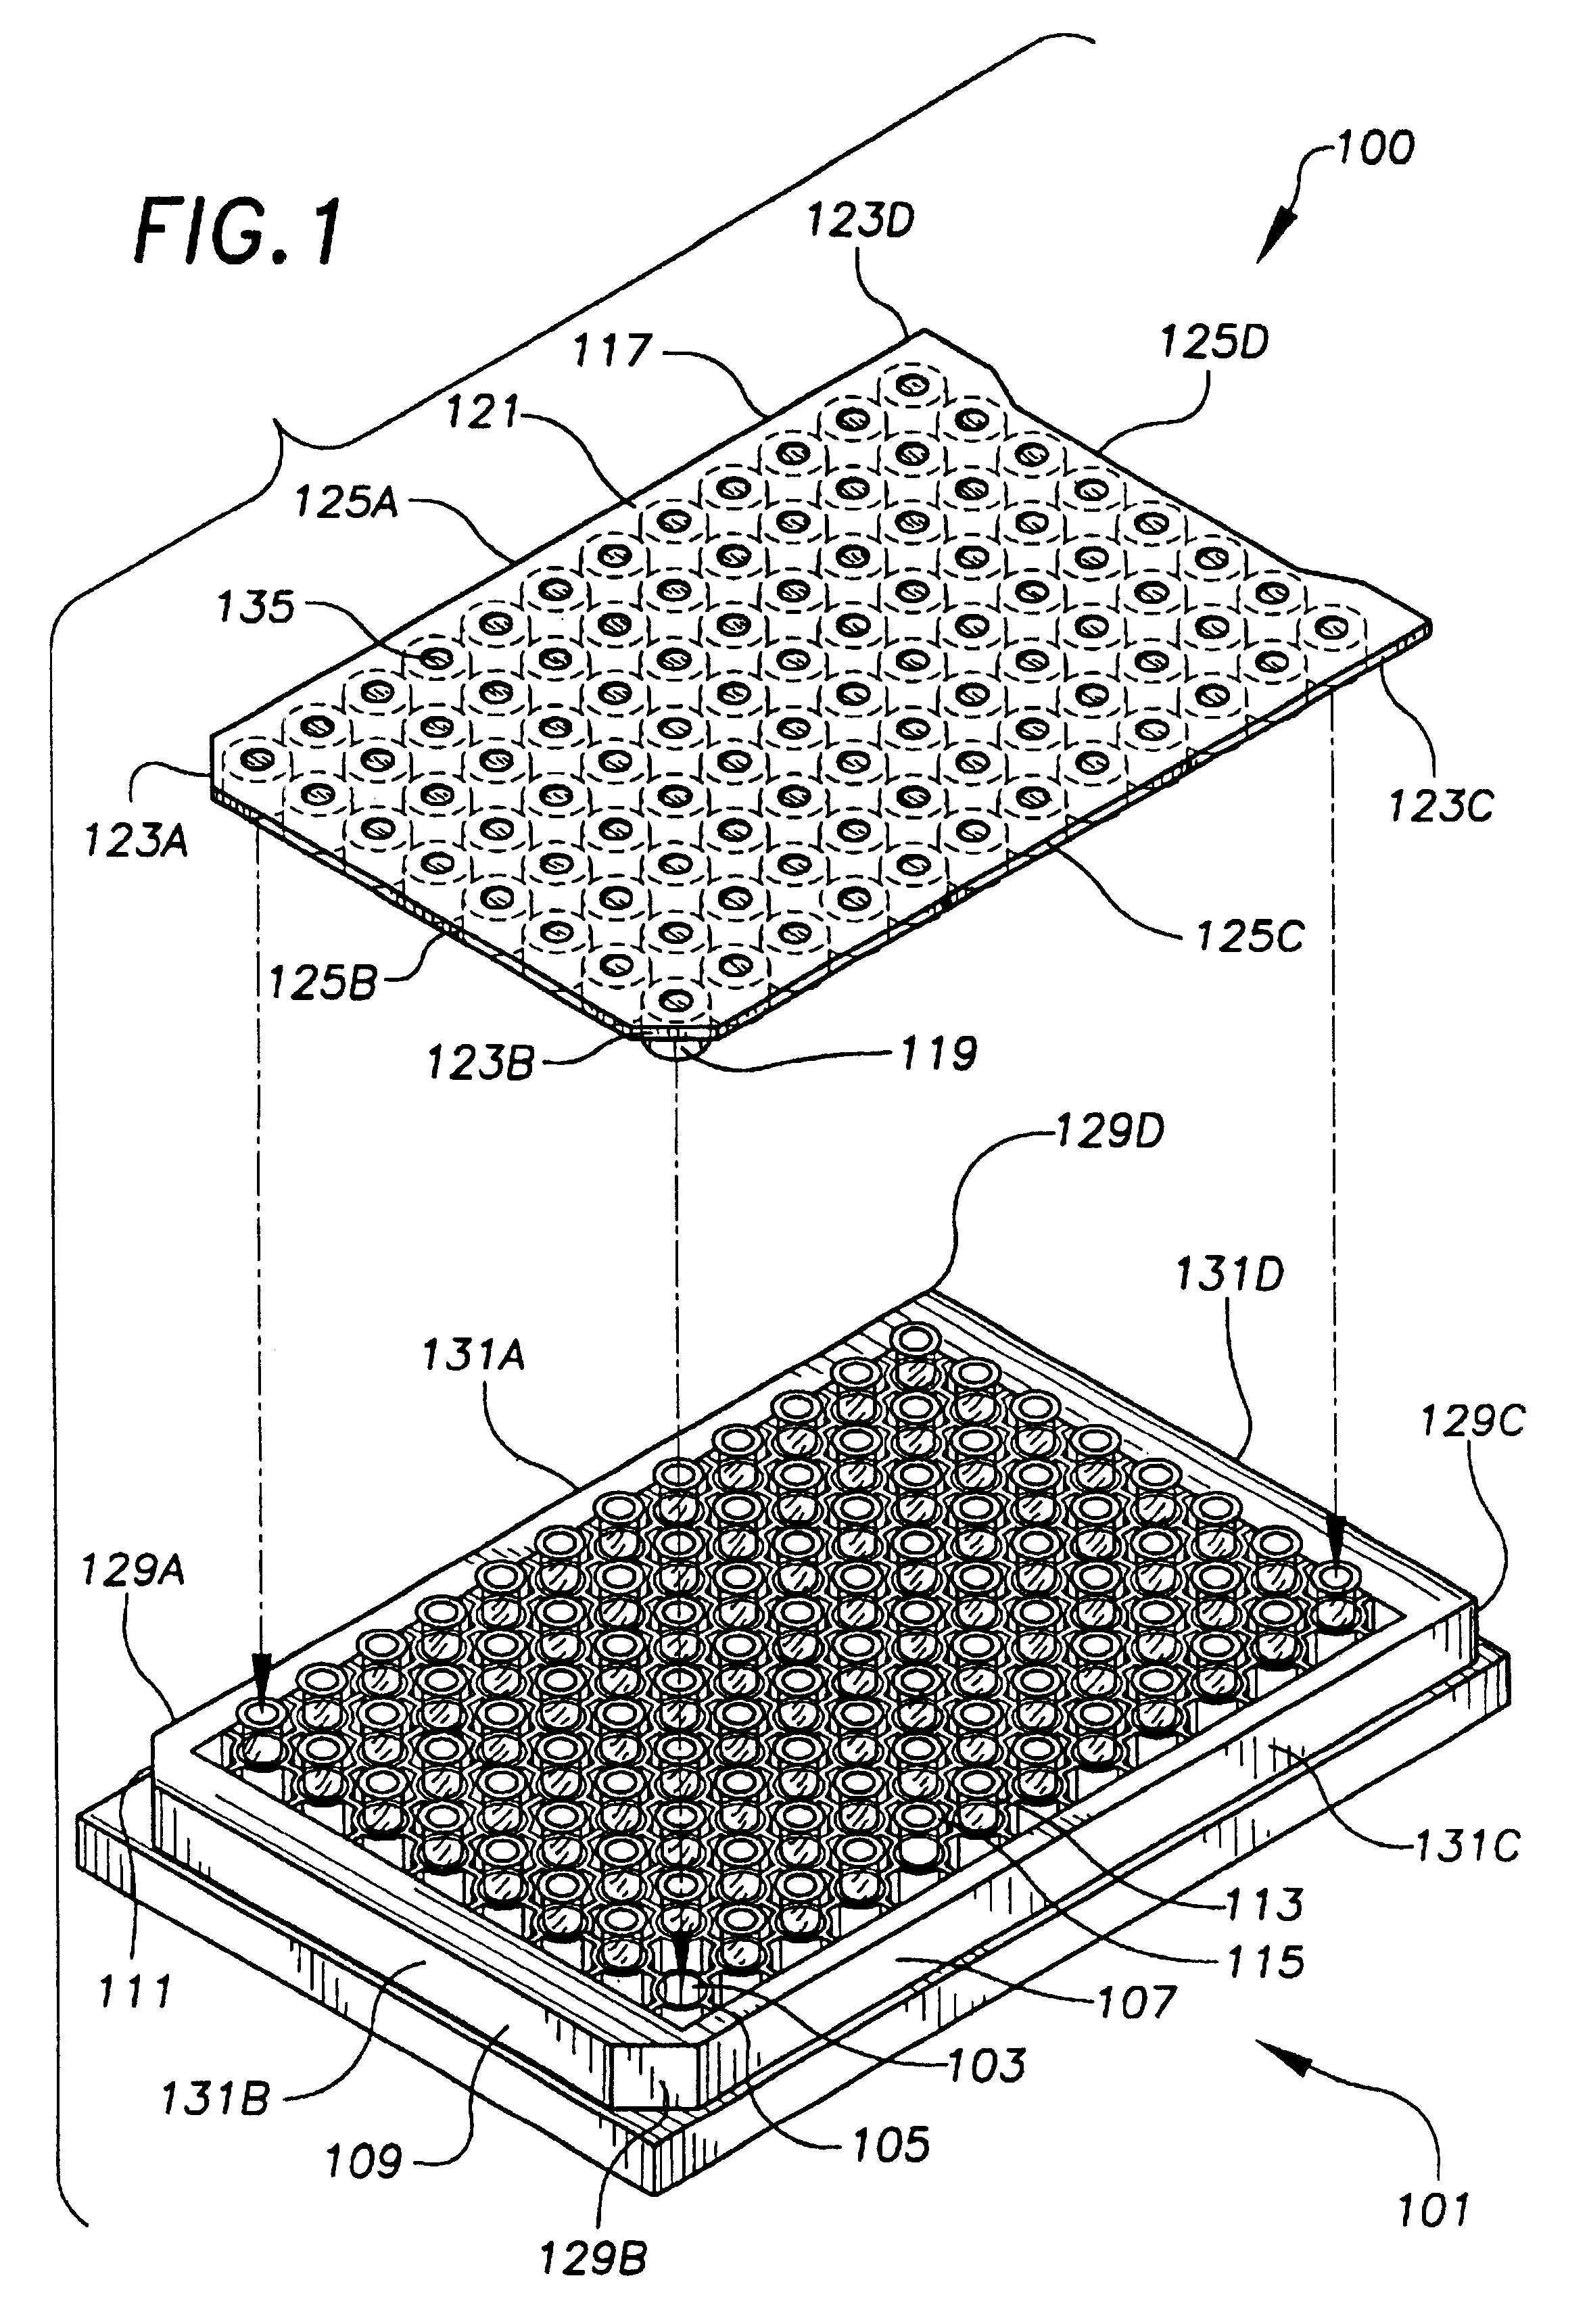 Microplate assembly and closure